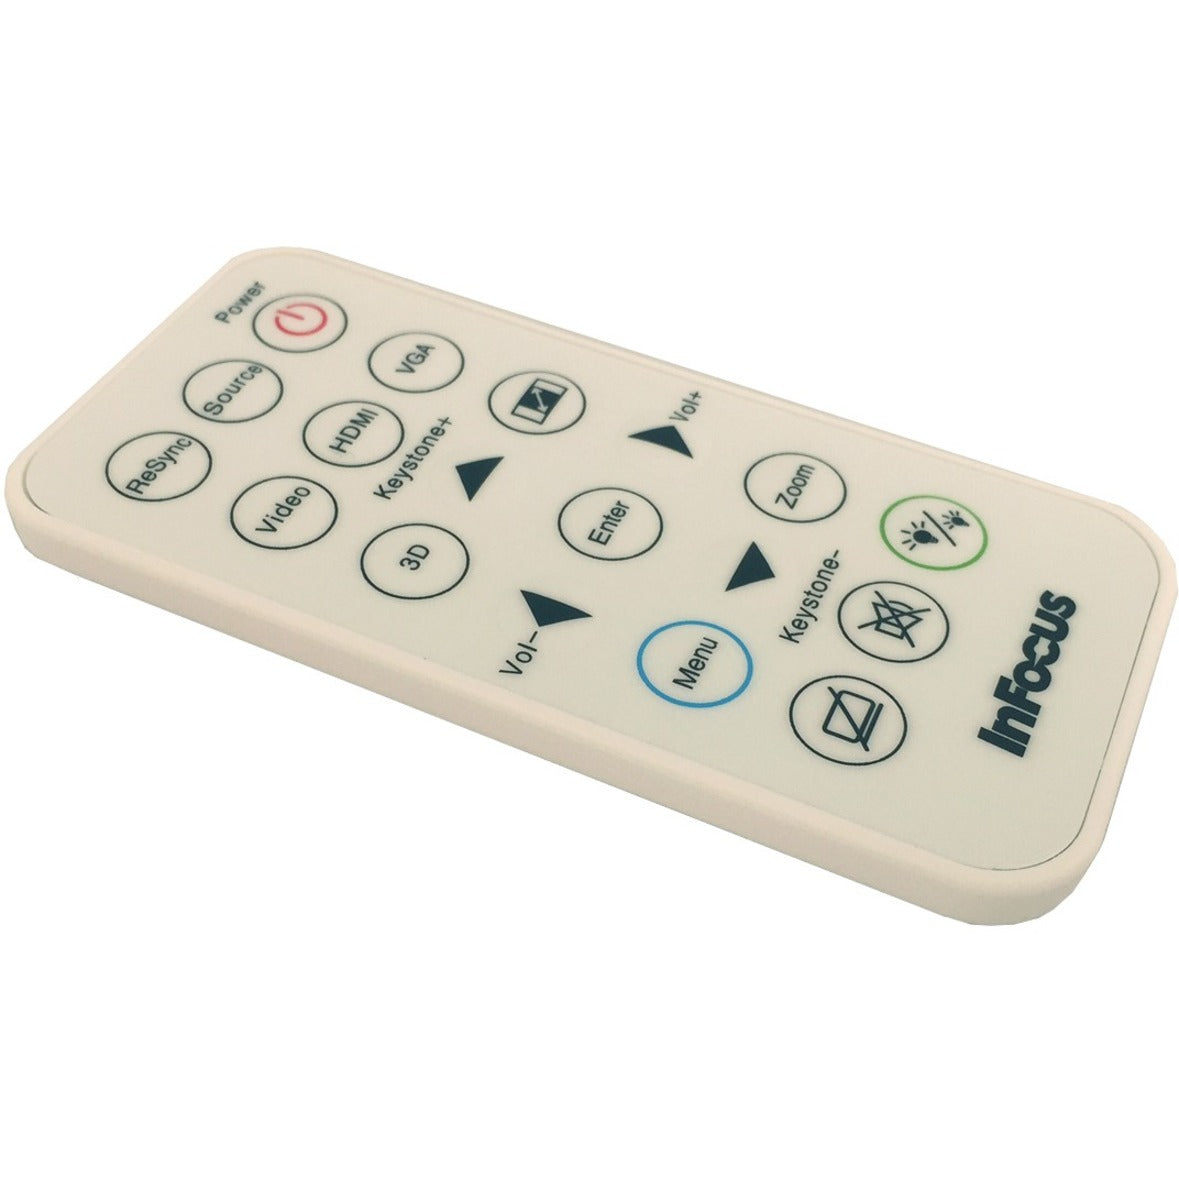 InFocus INA-REMPJ001 Replacement Remote for Select InFocus Projectors, Wireless Control